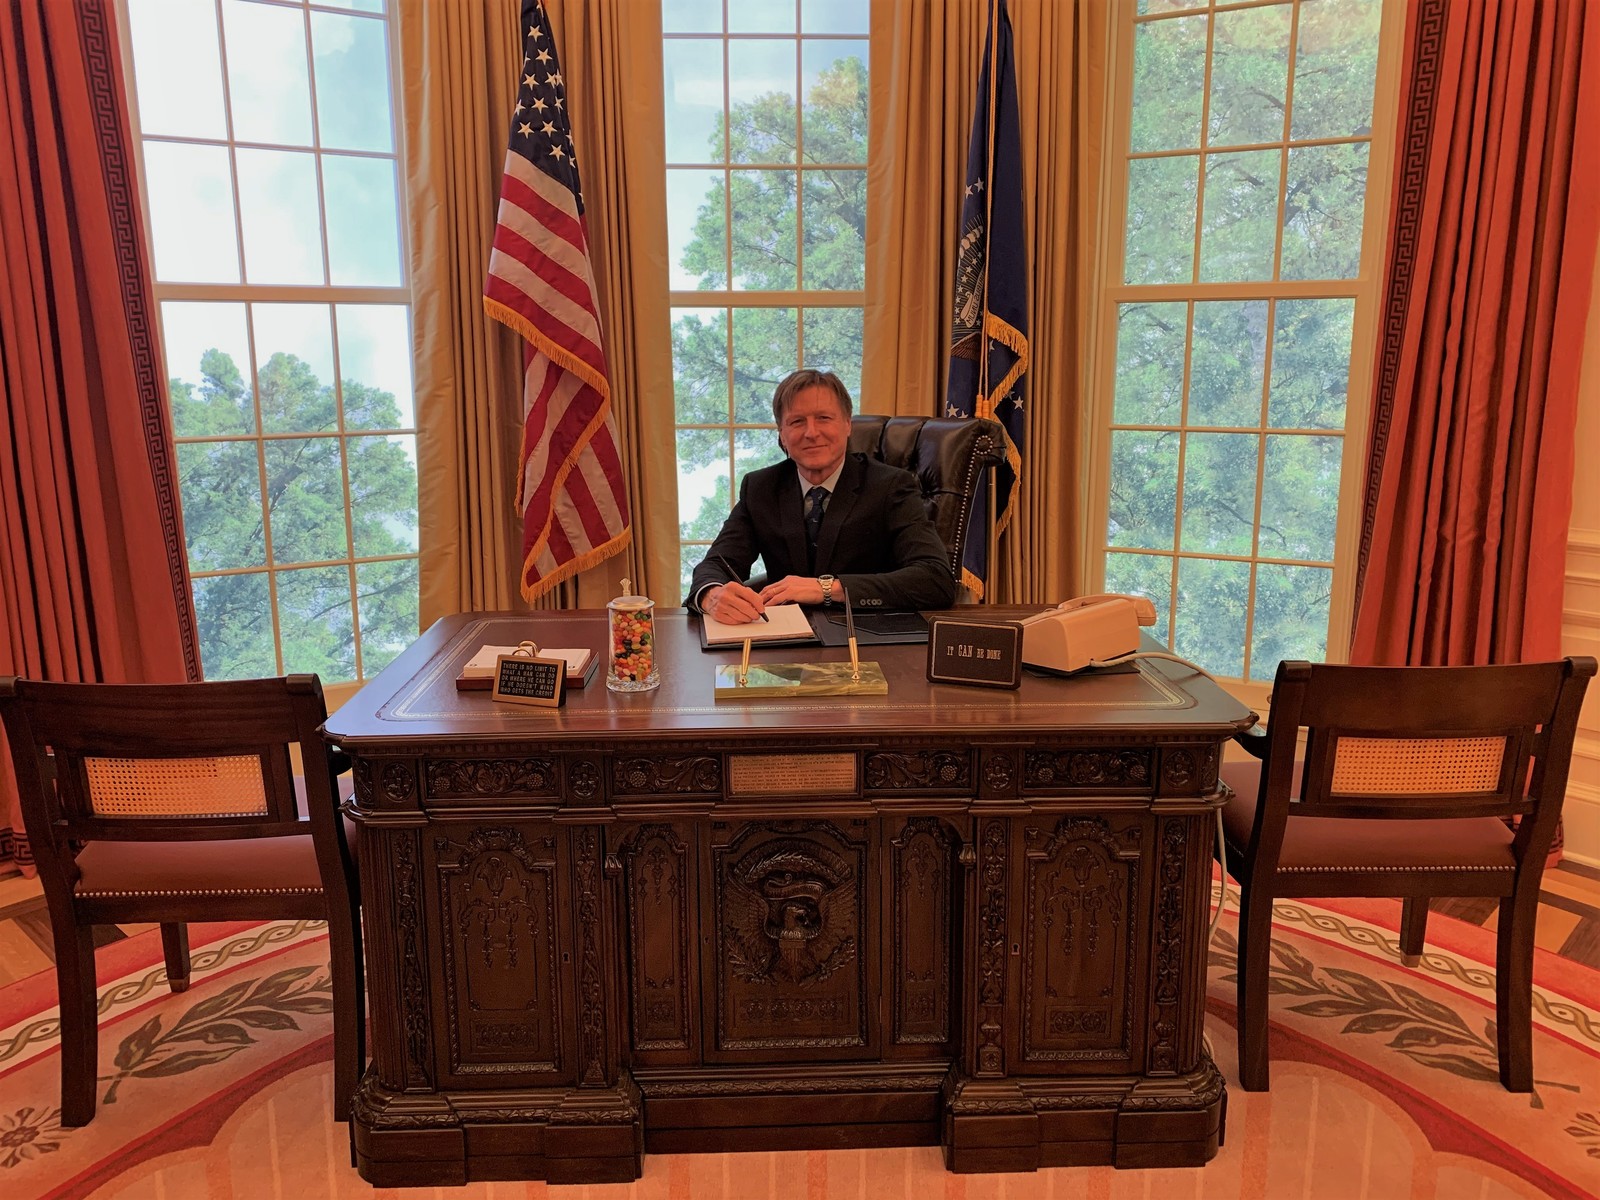 Mark Richey at the Resolute Desk at the opening of the exhibit 2020